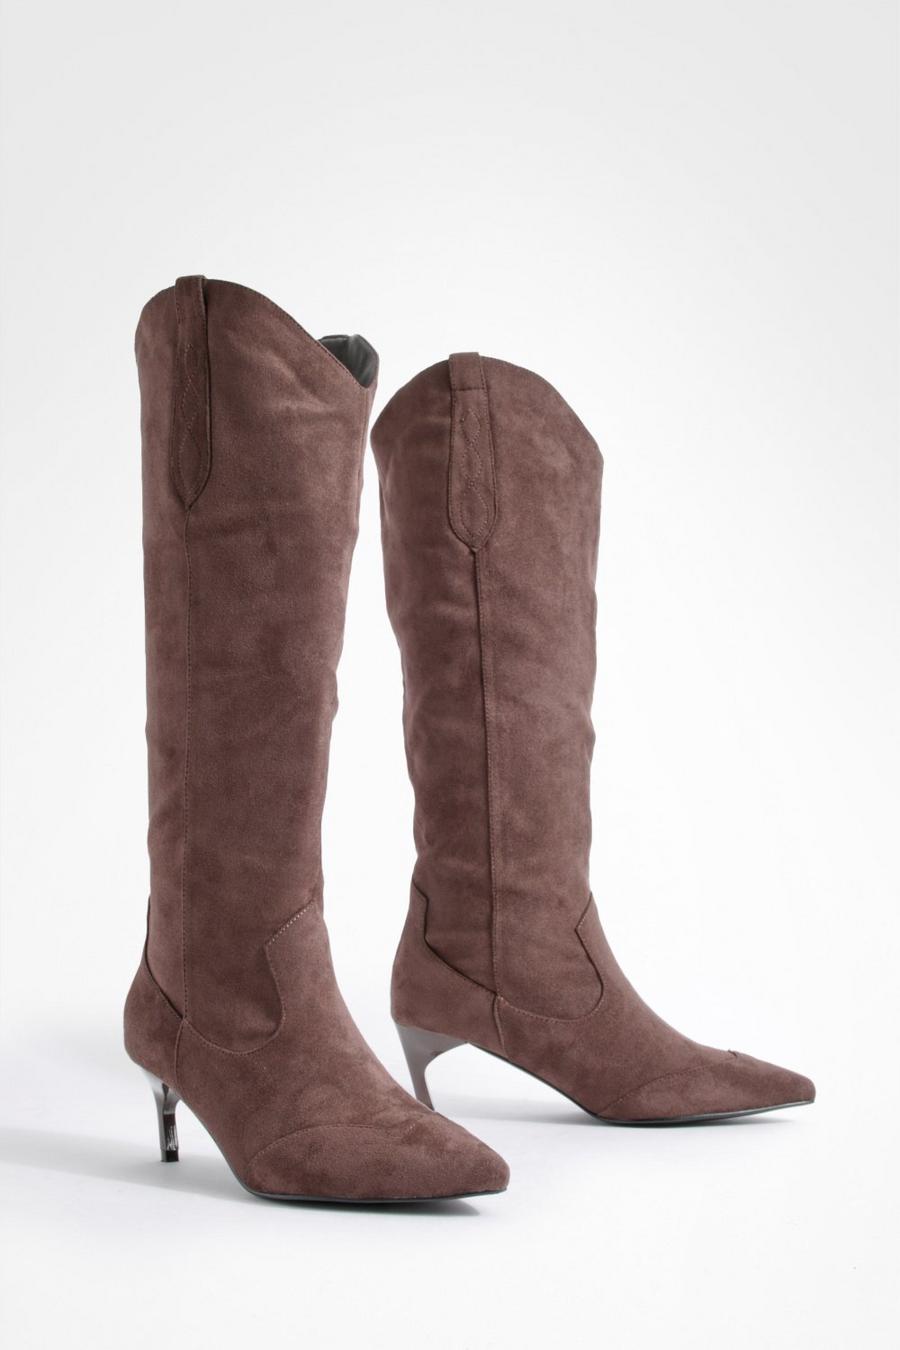 Chocolate marrone Western Detail Low Knee High Boots